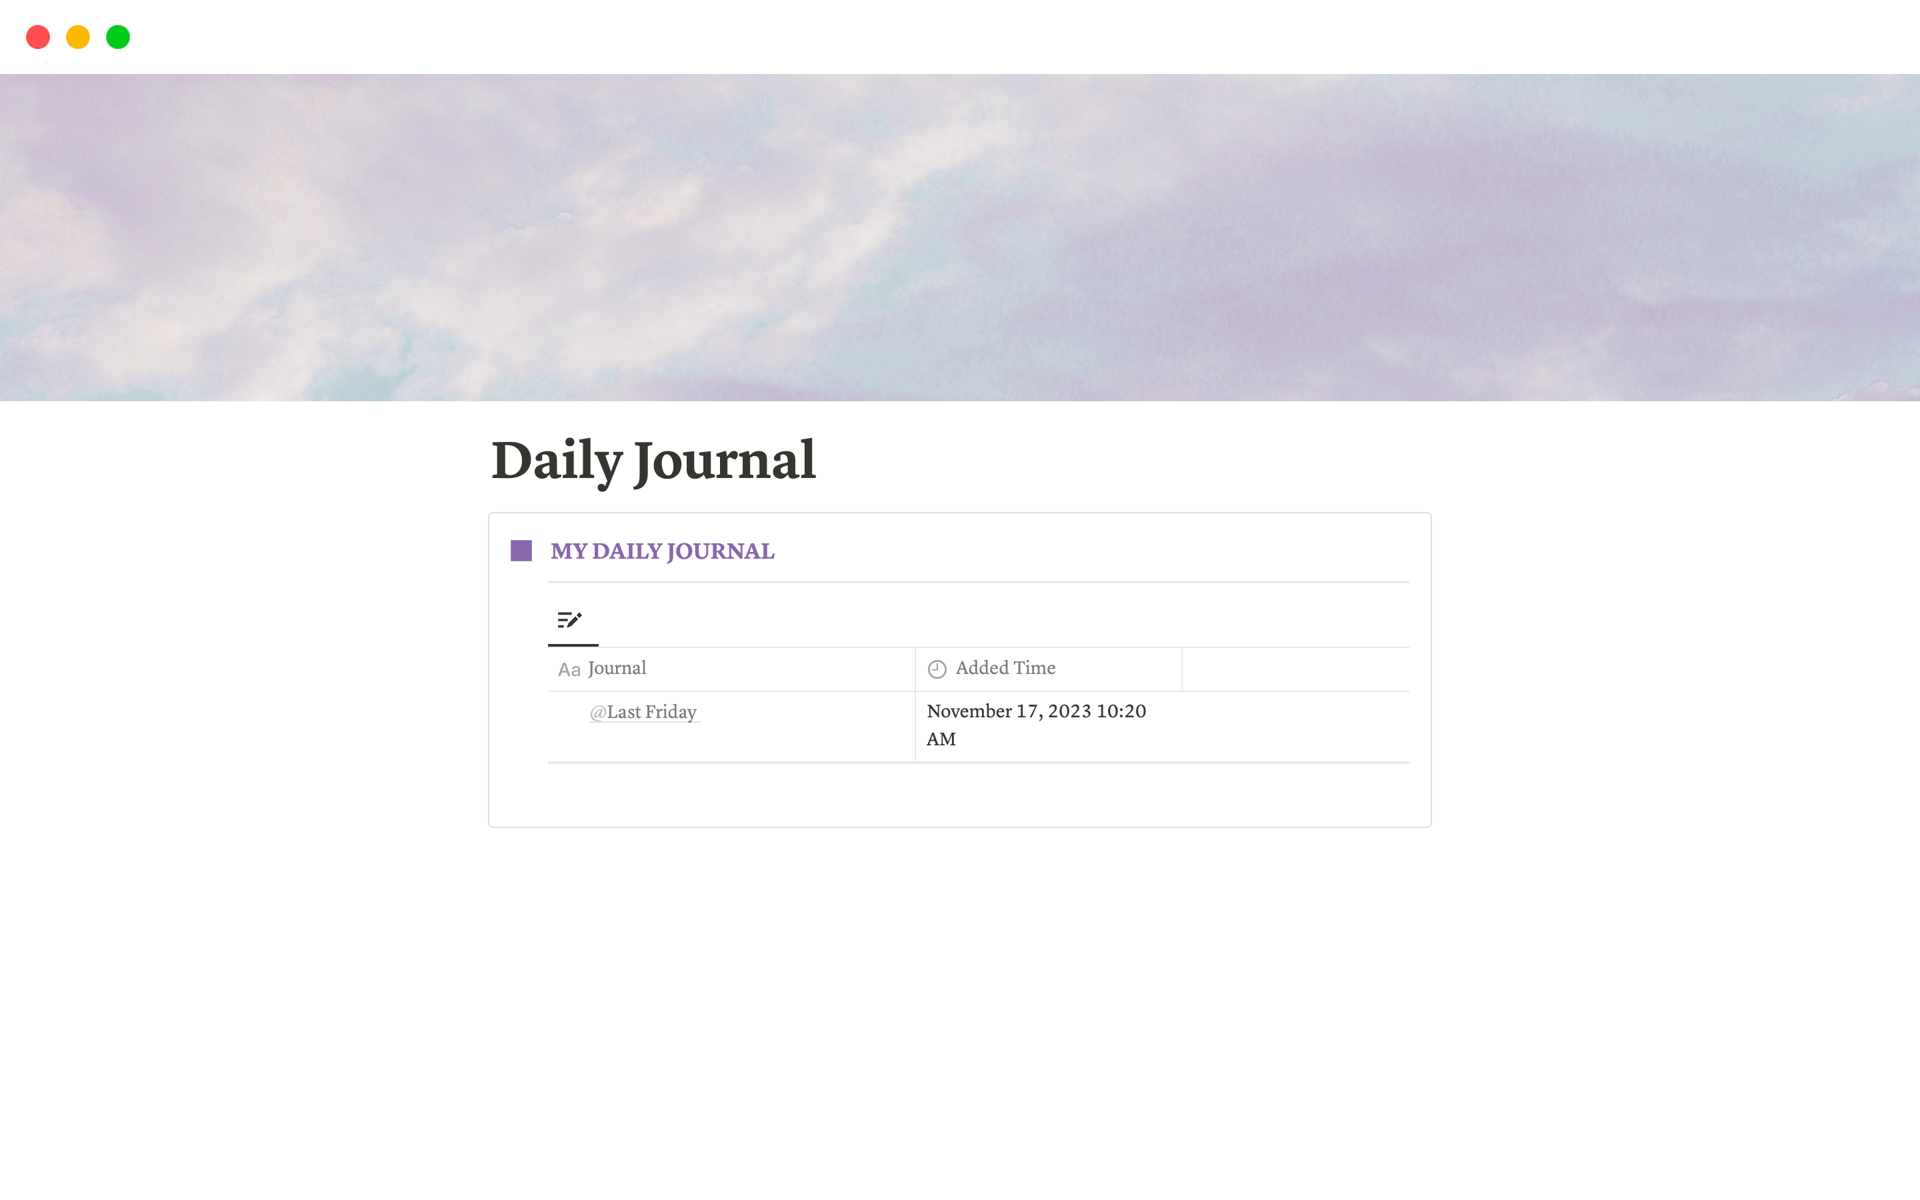 The Daily Journal Notion template can be used as a digital journal to write down memories, thoughts, or feelings.